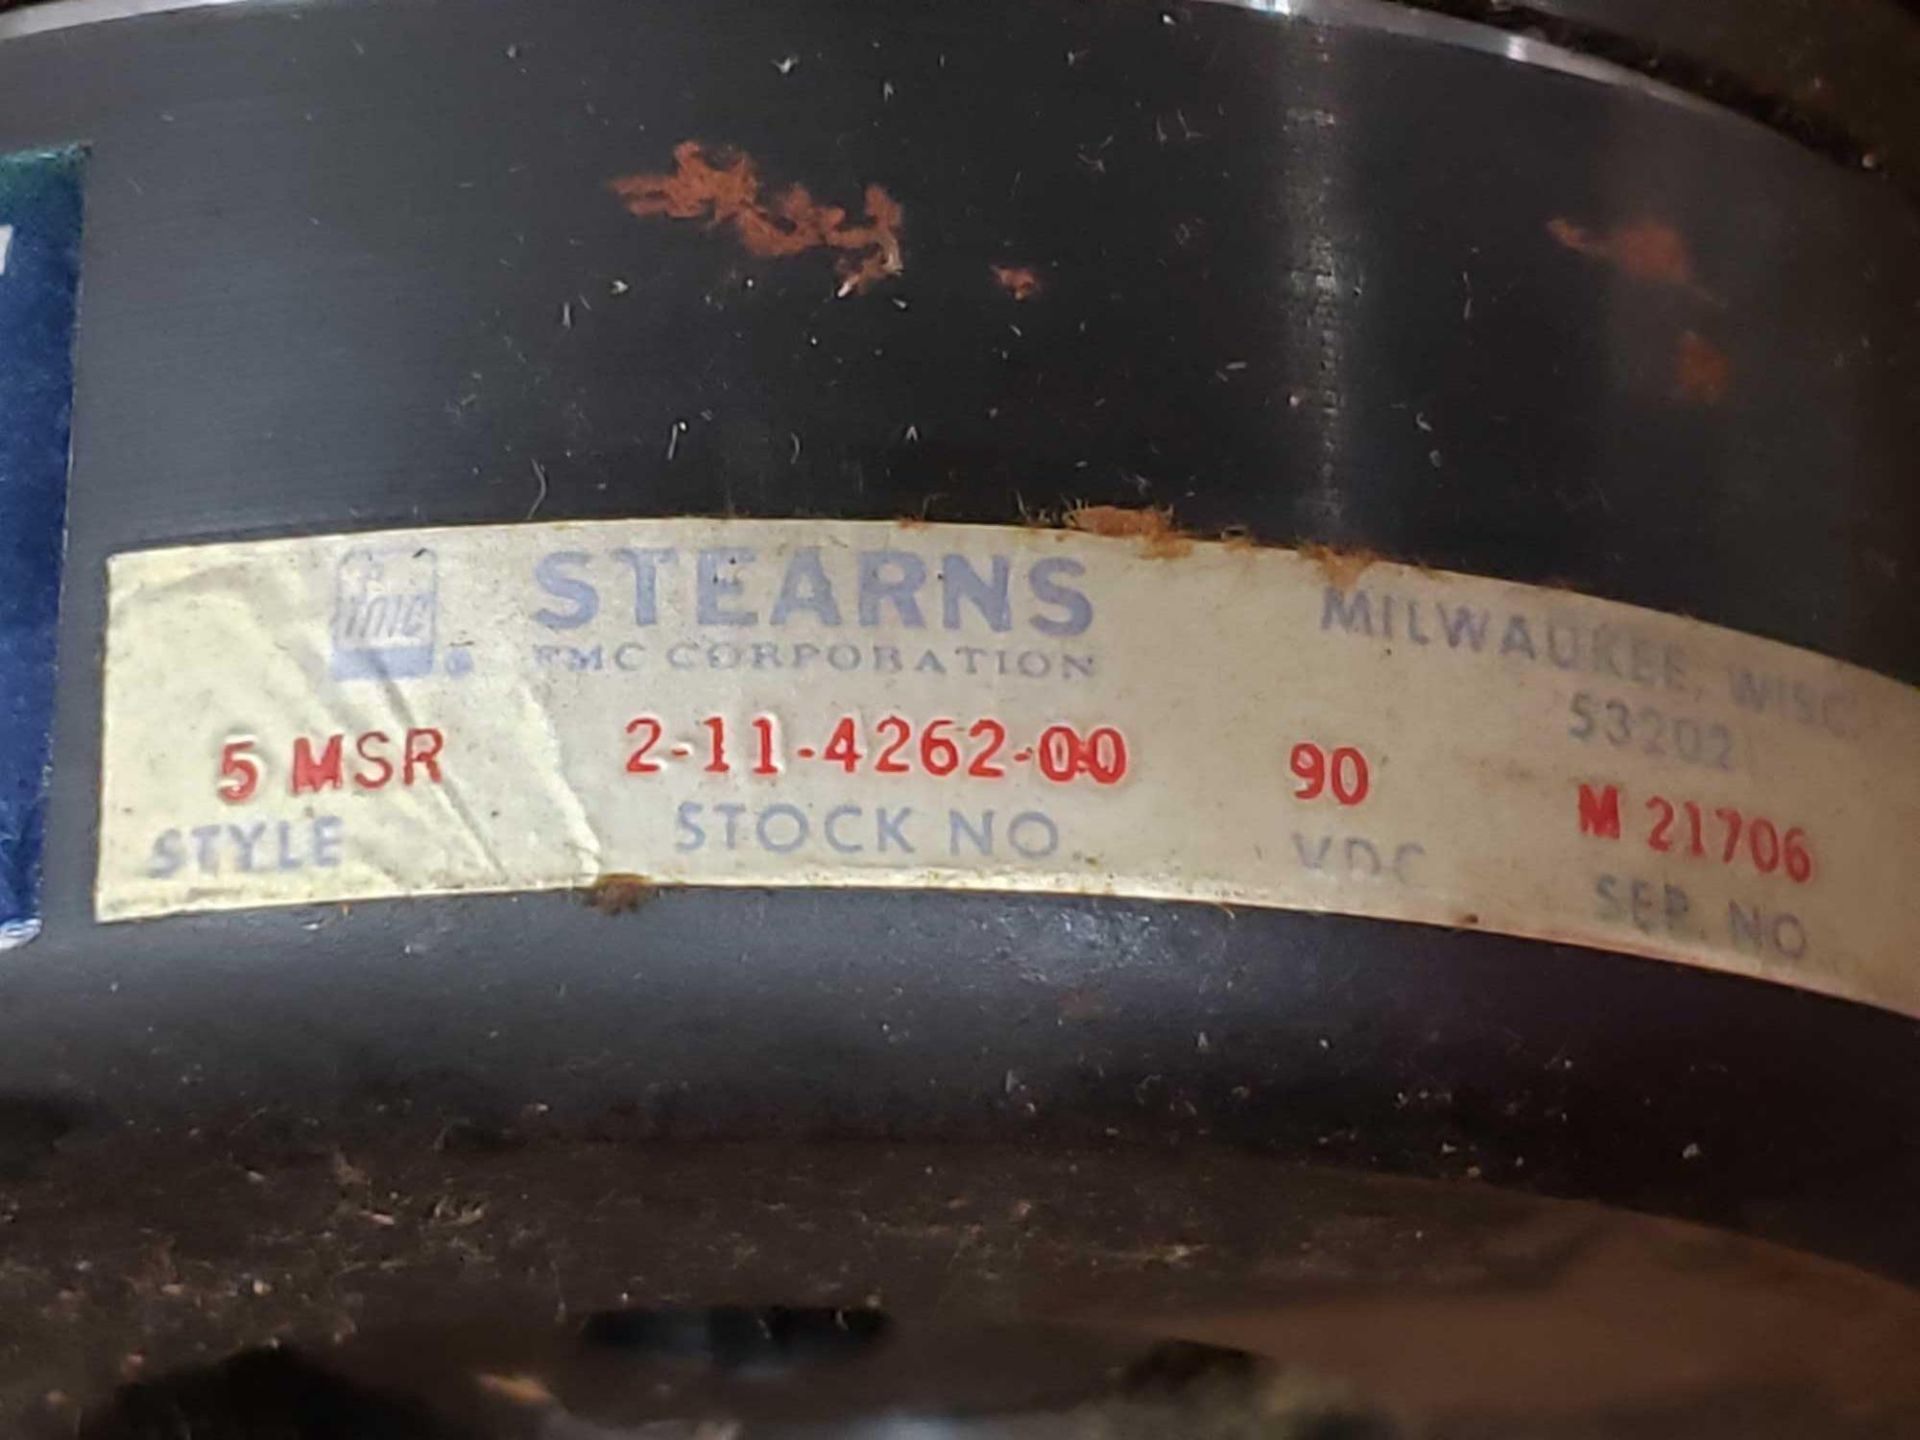 Stearns clutch brake. Style 5MSR. 90vdc. New with wear. - Image 3 of 3